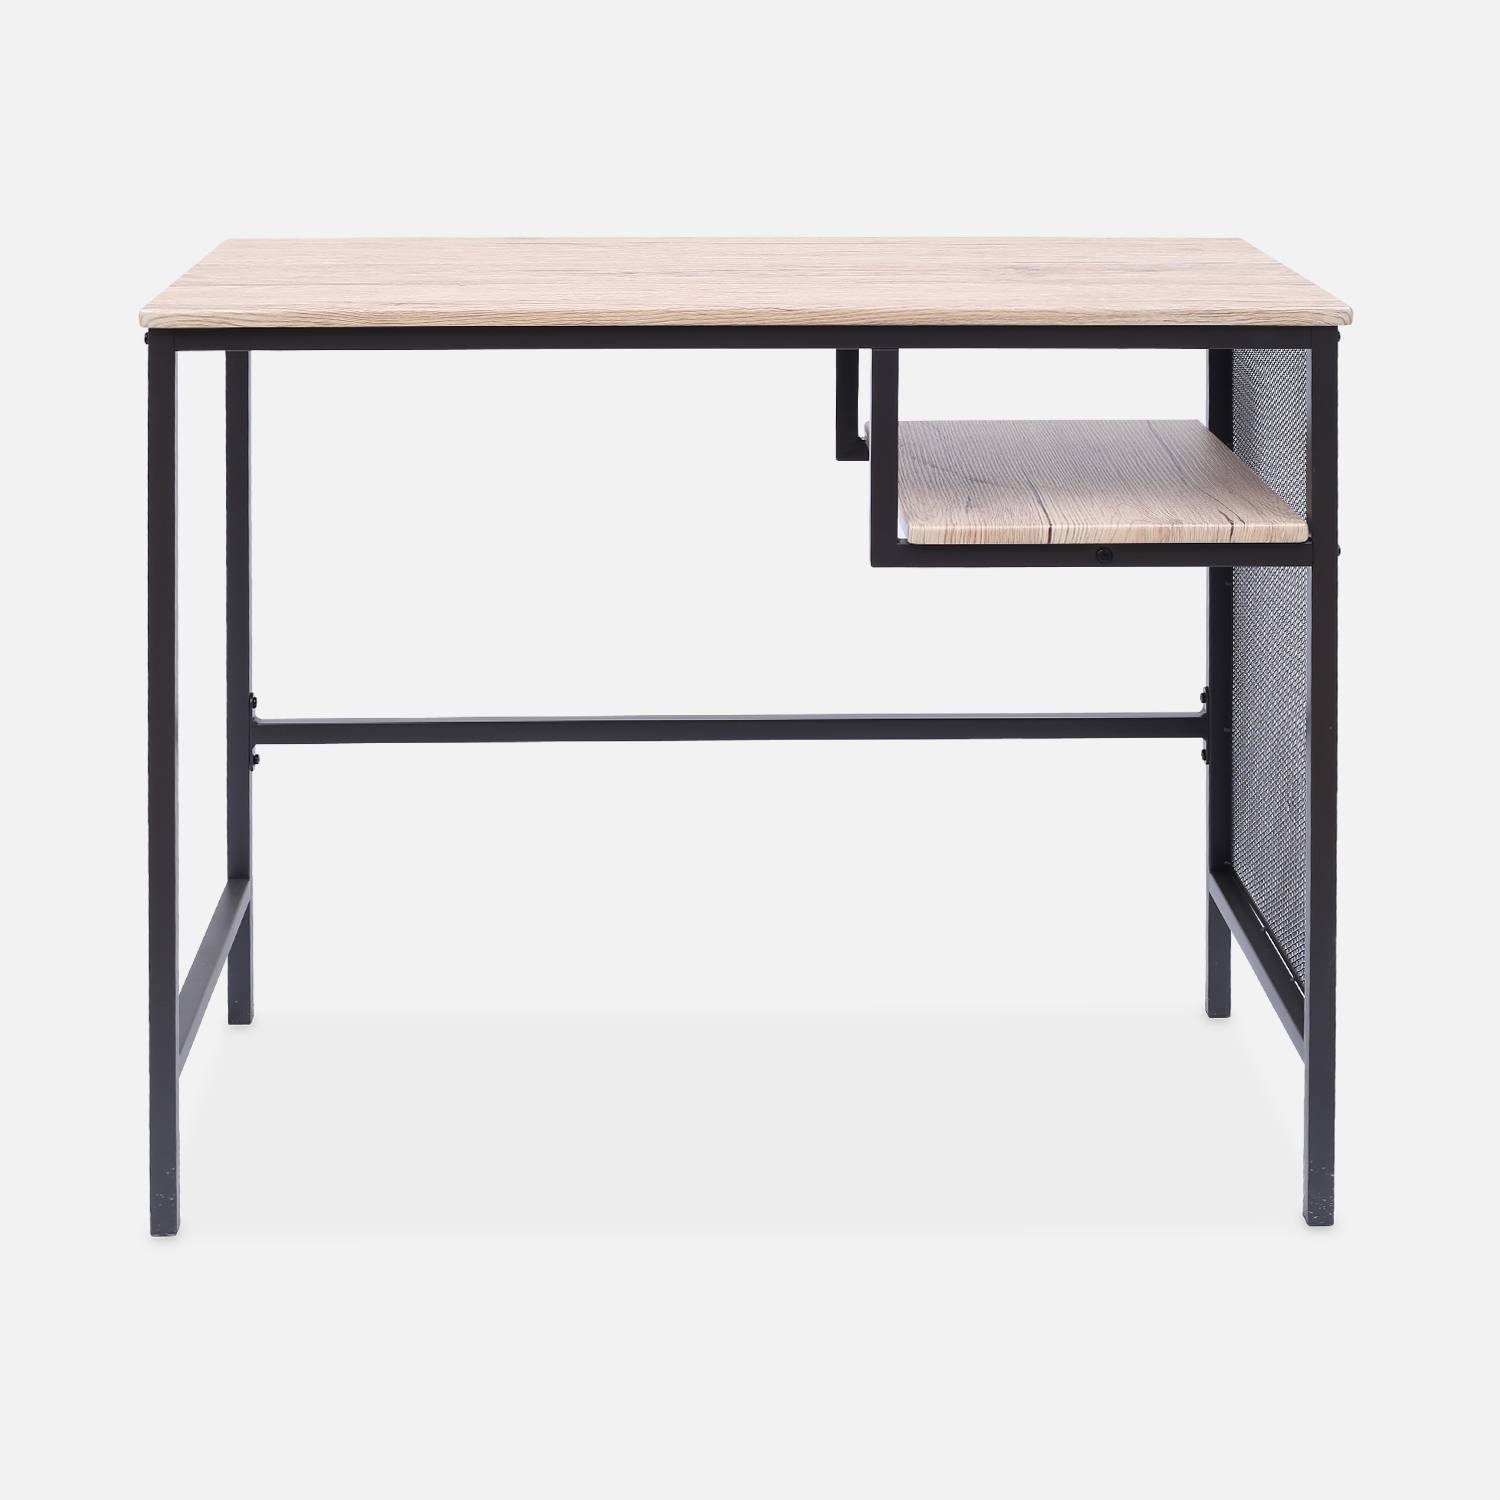 Metal and Wood Effect Desk with Storage Compartment, 90cm Photo4